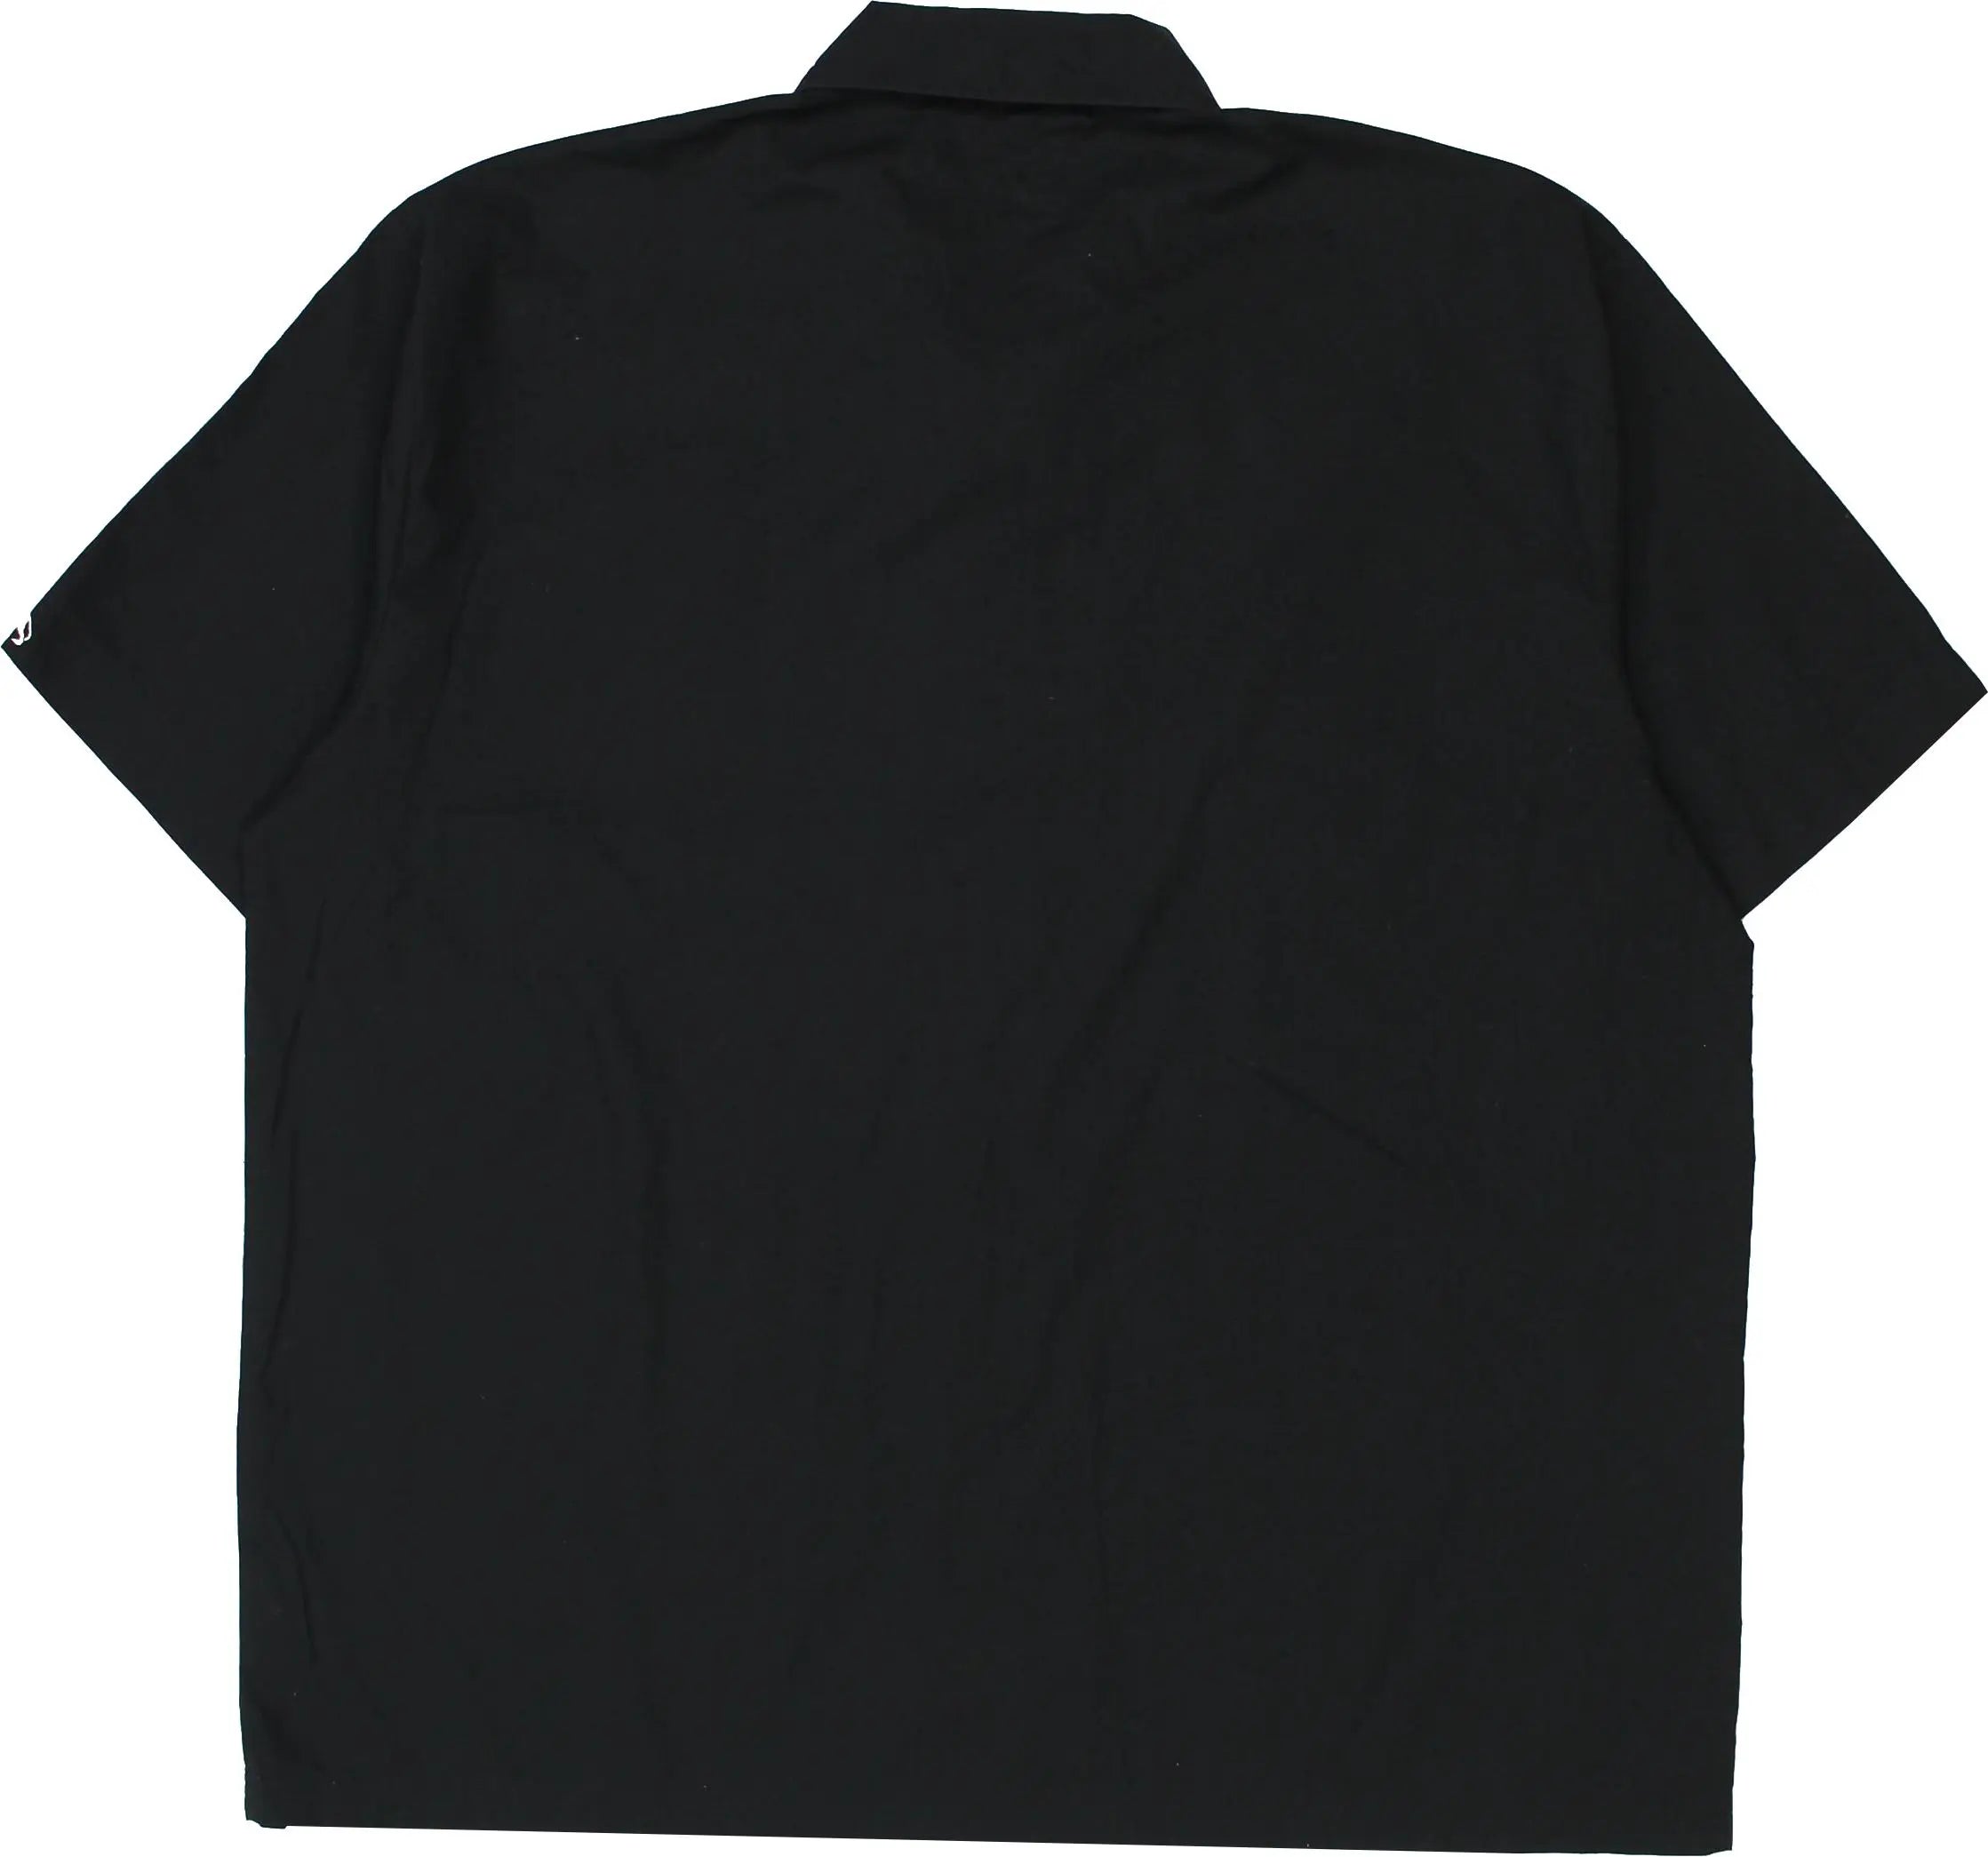 Lonsdale - Black Short Sleeve Zip Up Shirt by Lonsdale- ThriftTale.com - Vintage and second handclothing